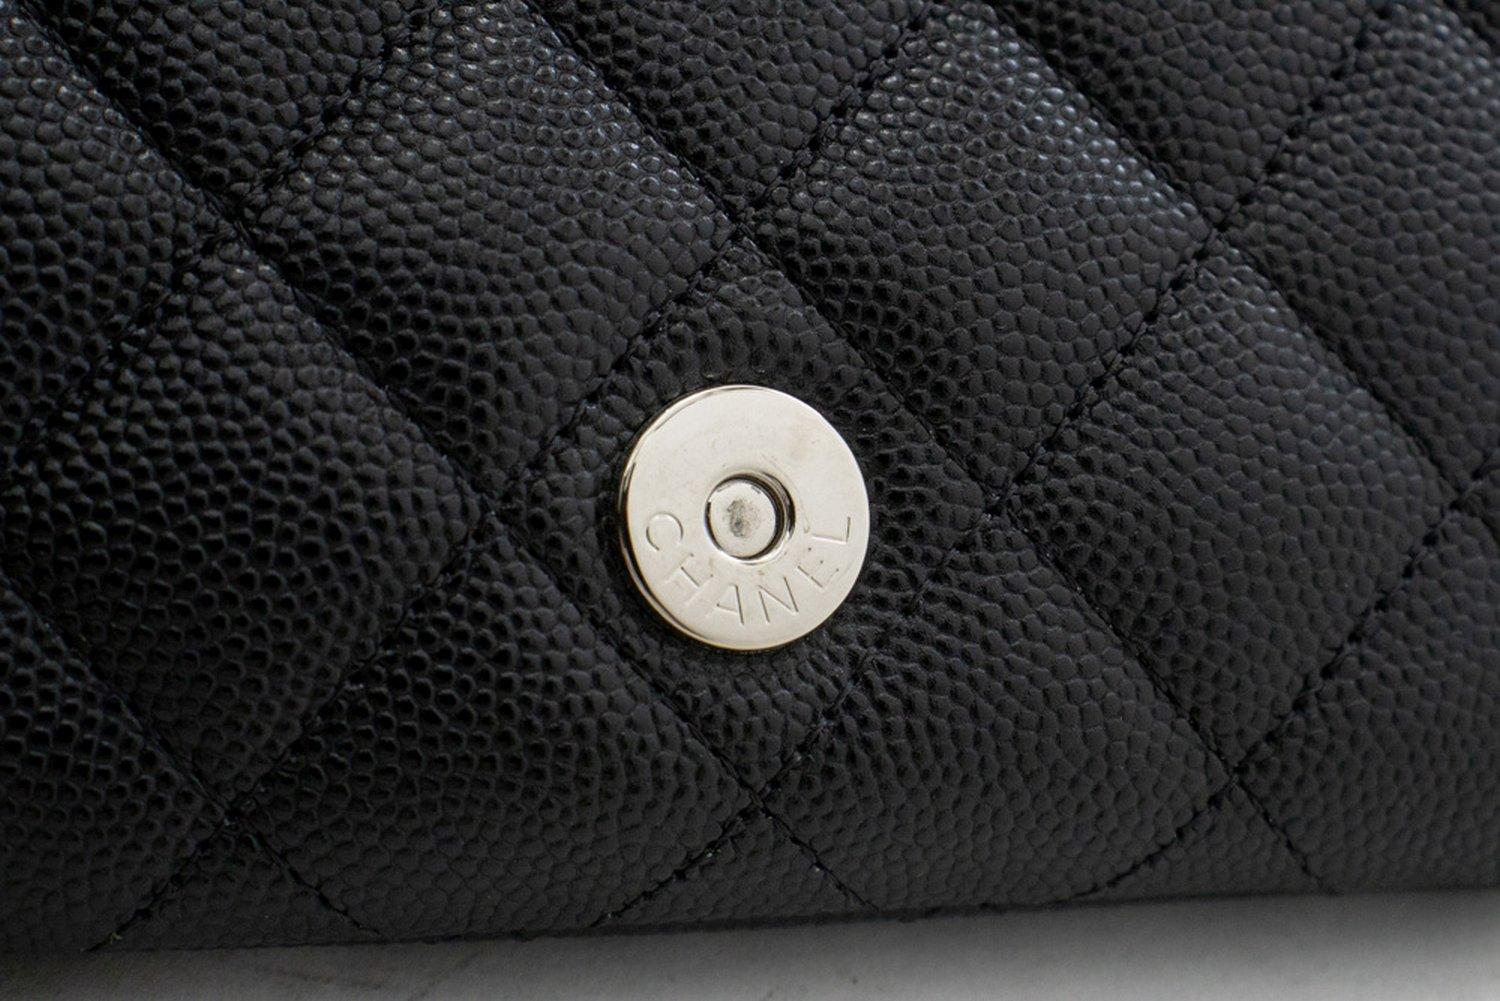 CHANEL Flap Phone Holder With Chain Bag Black Crossbody Clutch For Sale 10